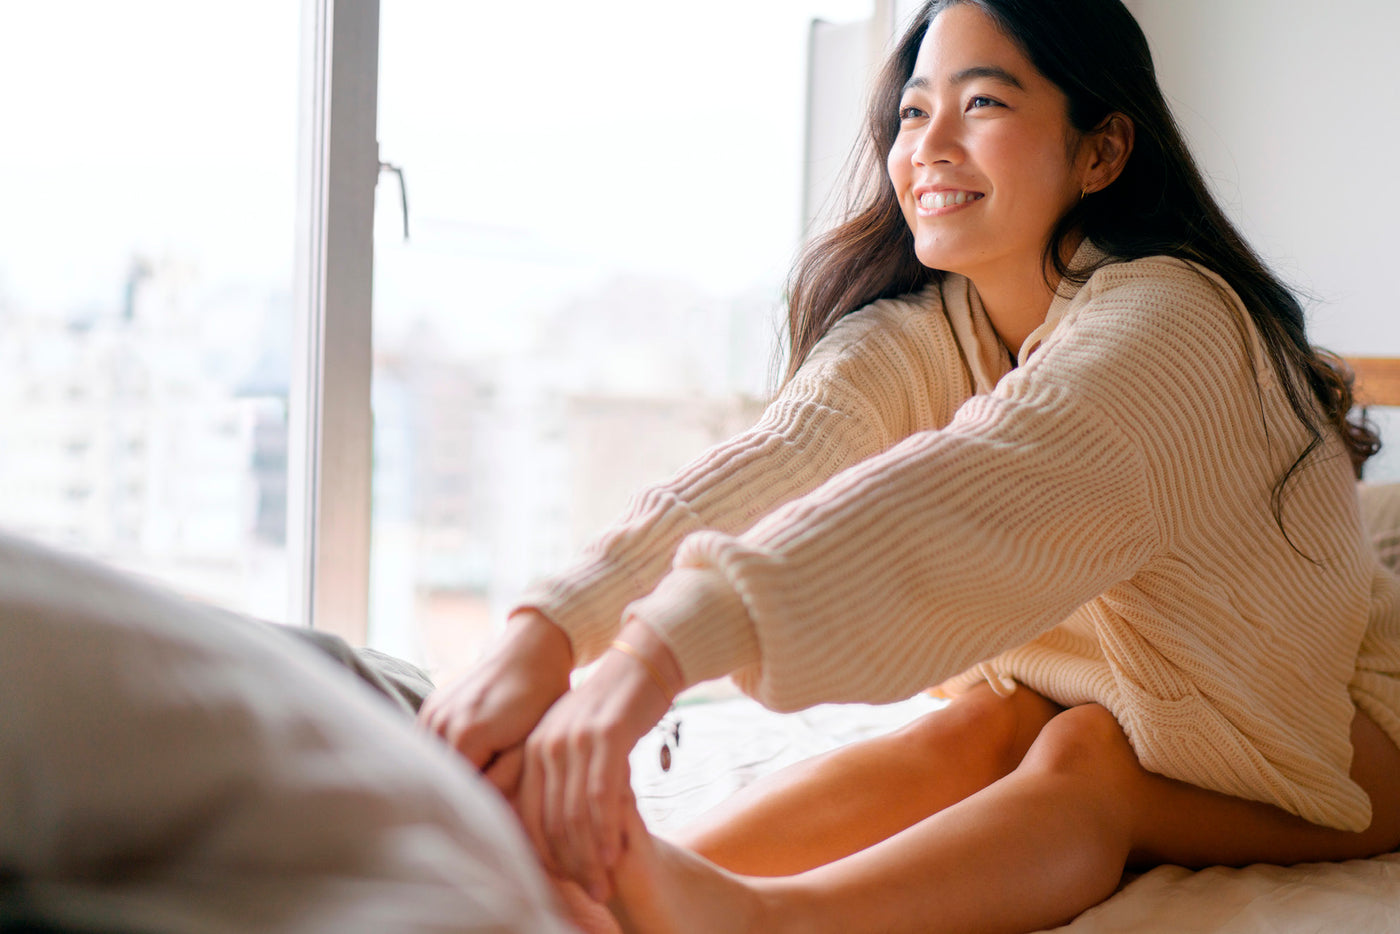 Image of a girl smiling, sitting on her bed, looking out the window